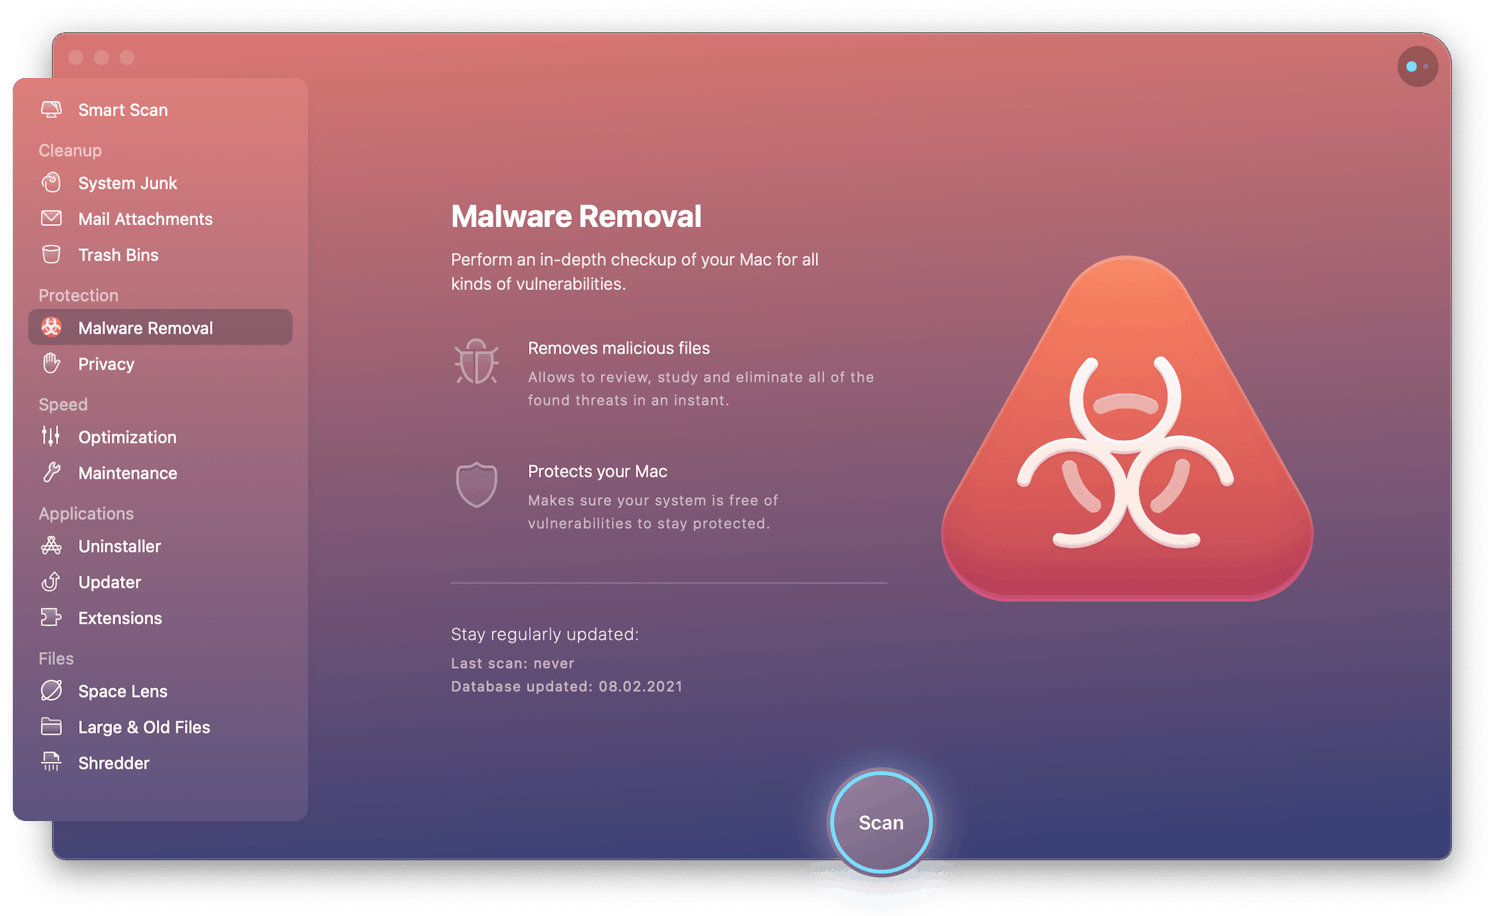 Malware removal module of CleanMyMacX